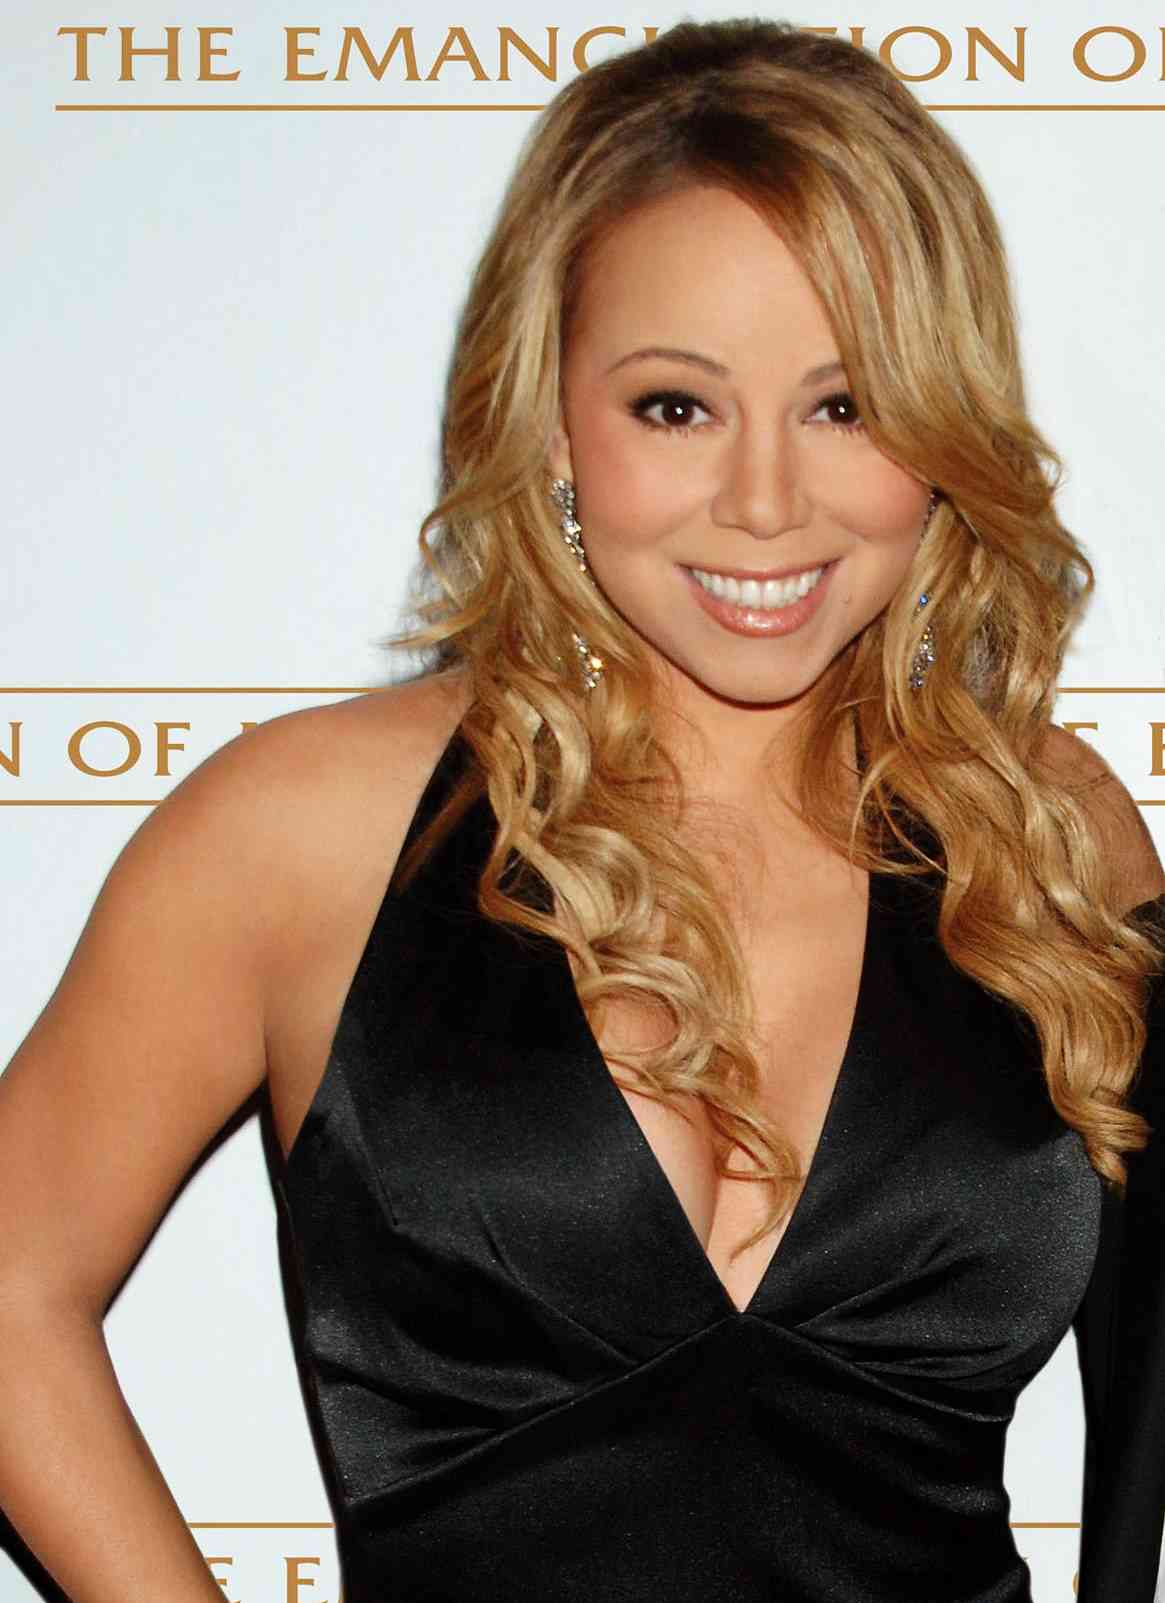 Mariah Carey Shows Off Her Generous Curves Photos Video The Trent 